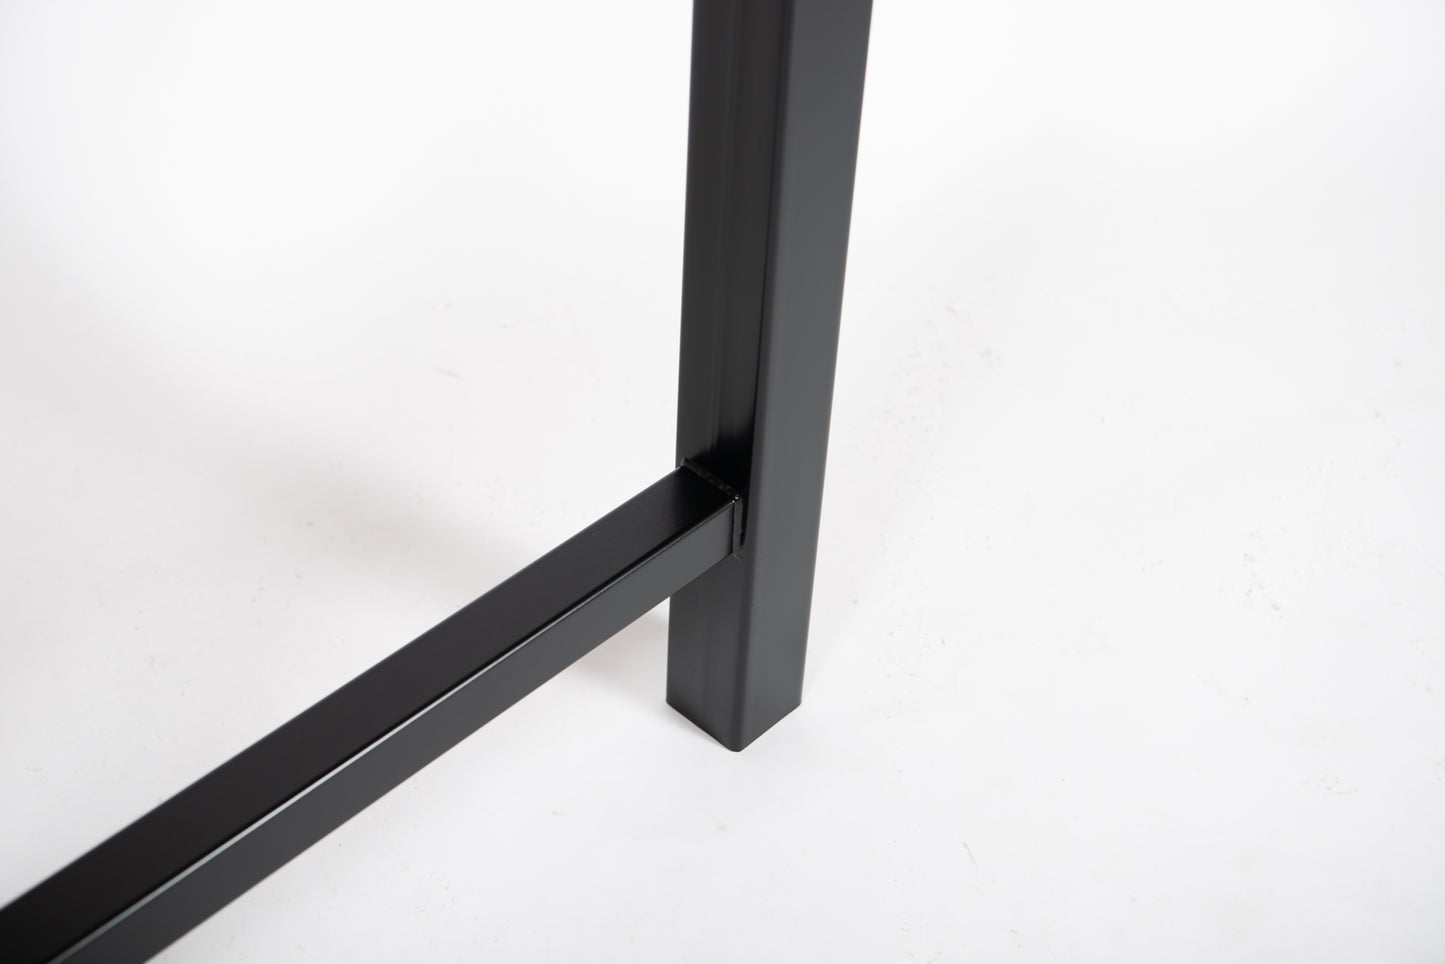 The HH Table Legs (Pair)